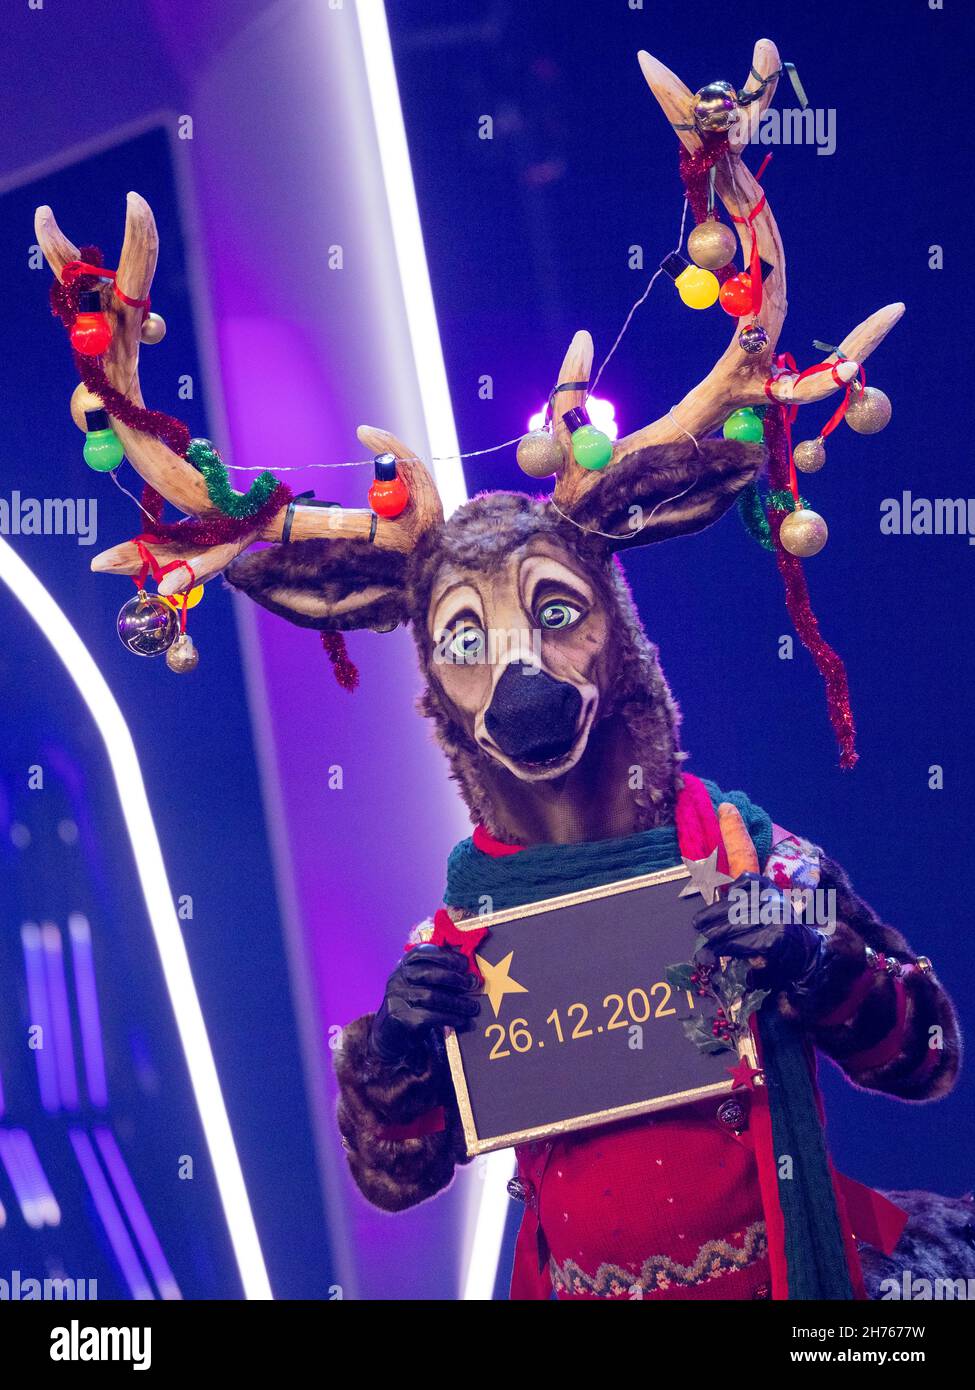 Cologne, Germany. 20th Nov, 2021. A reindeer figure points out a special show on stage in the Prosieben show "The Masked Singer". Credit: Rolf Vennenbernd/dpa/Alamy Live News Stock Photo